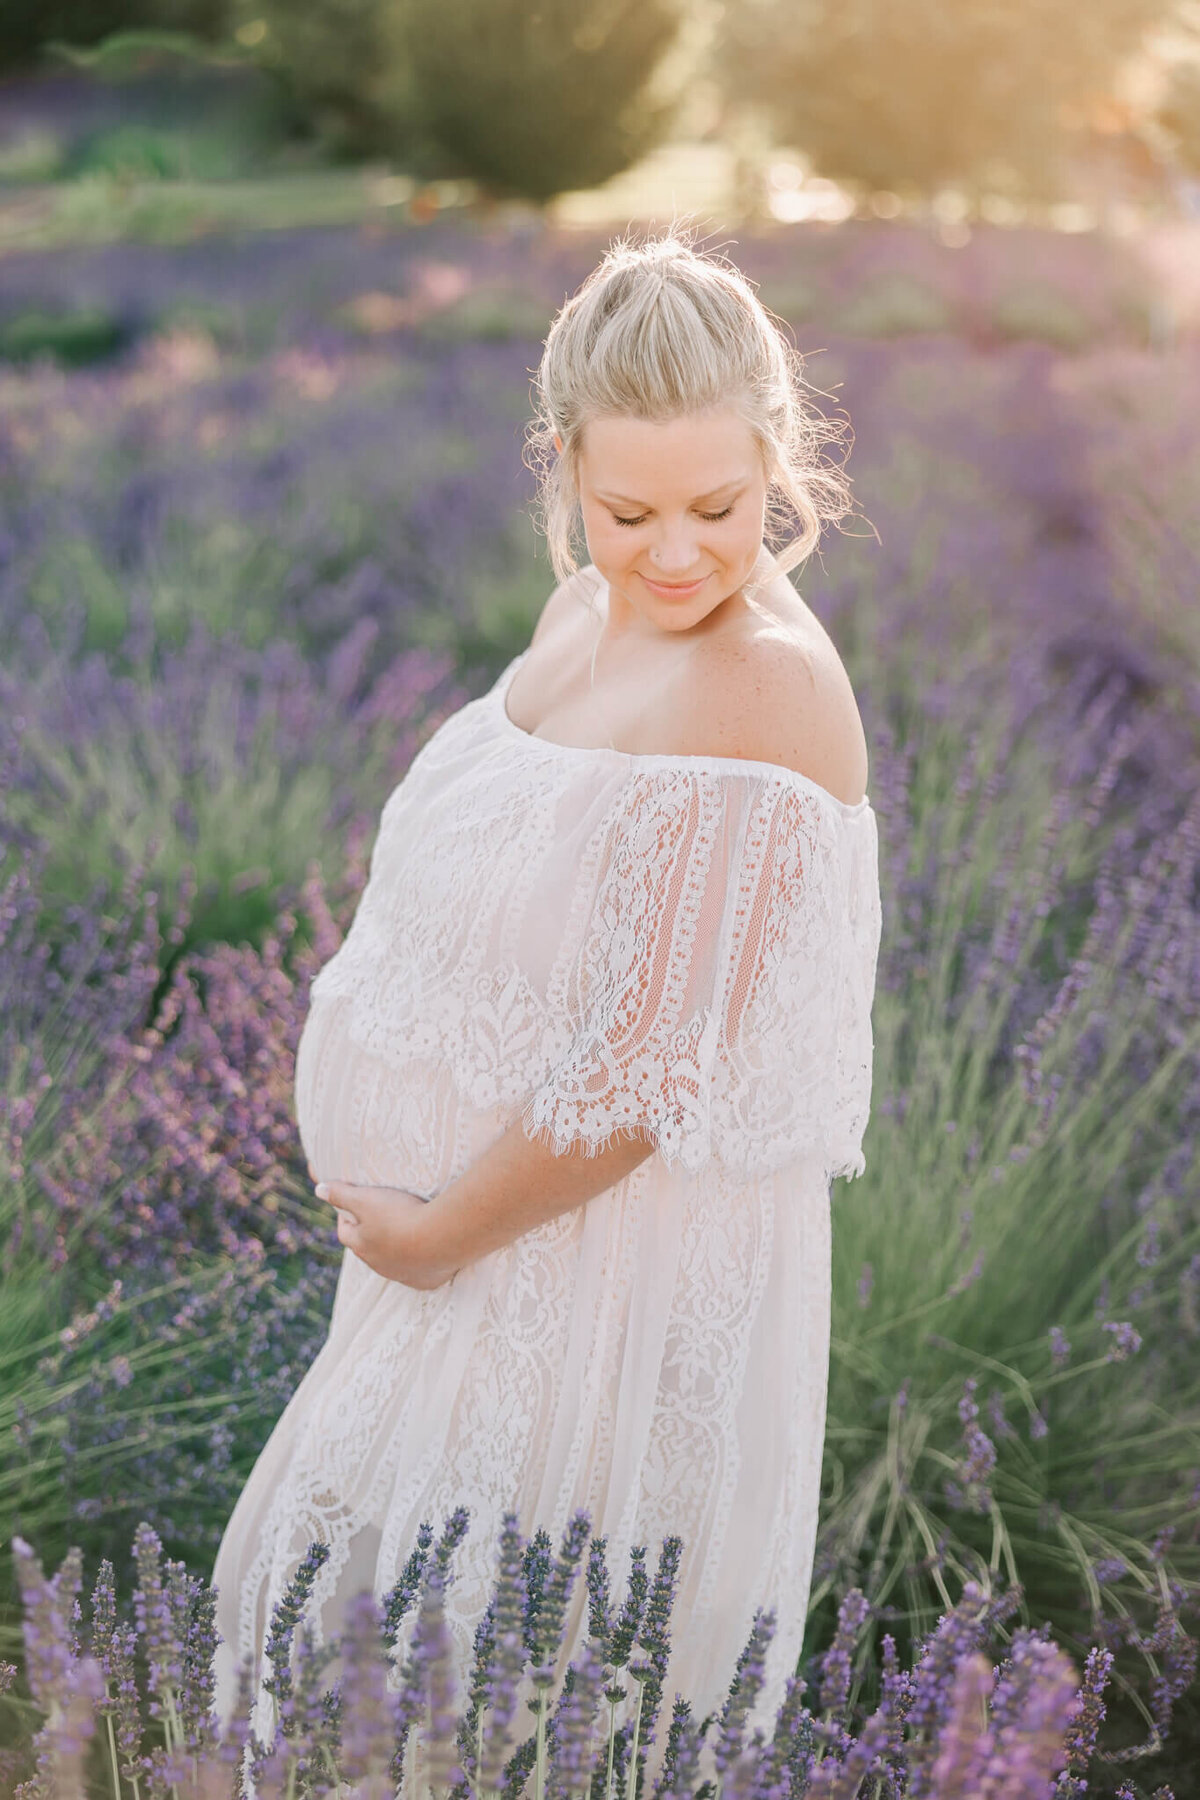 pregnant woman wearing white dress in lavender field at sunset.